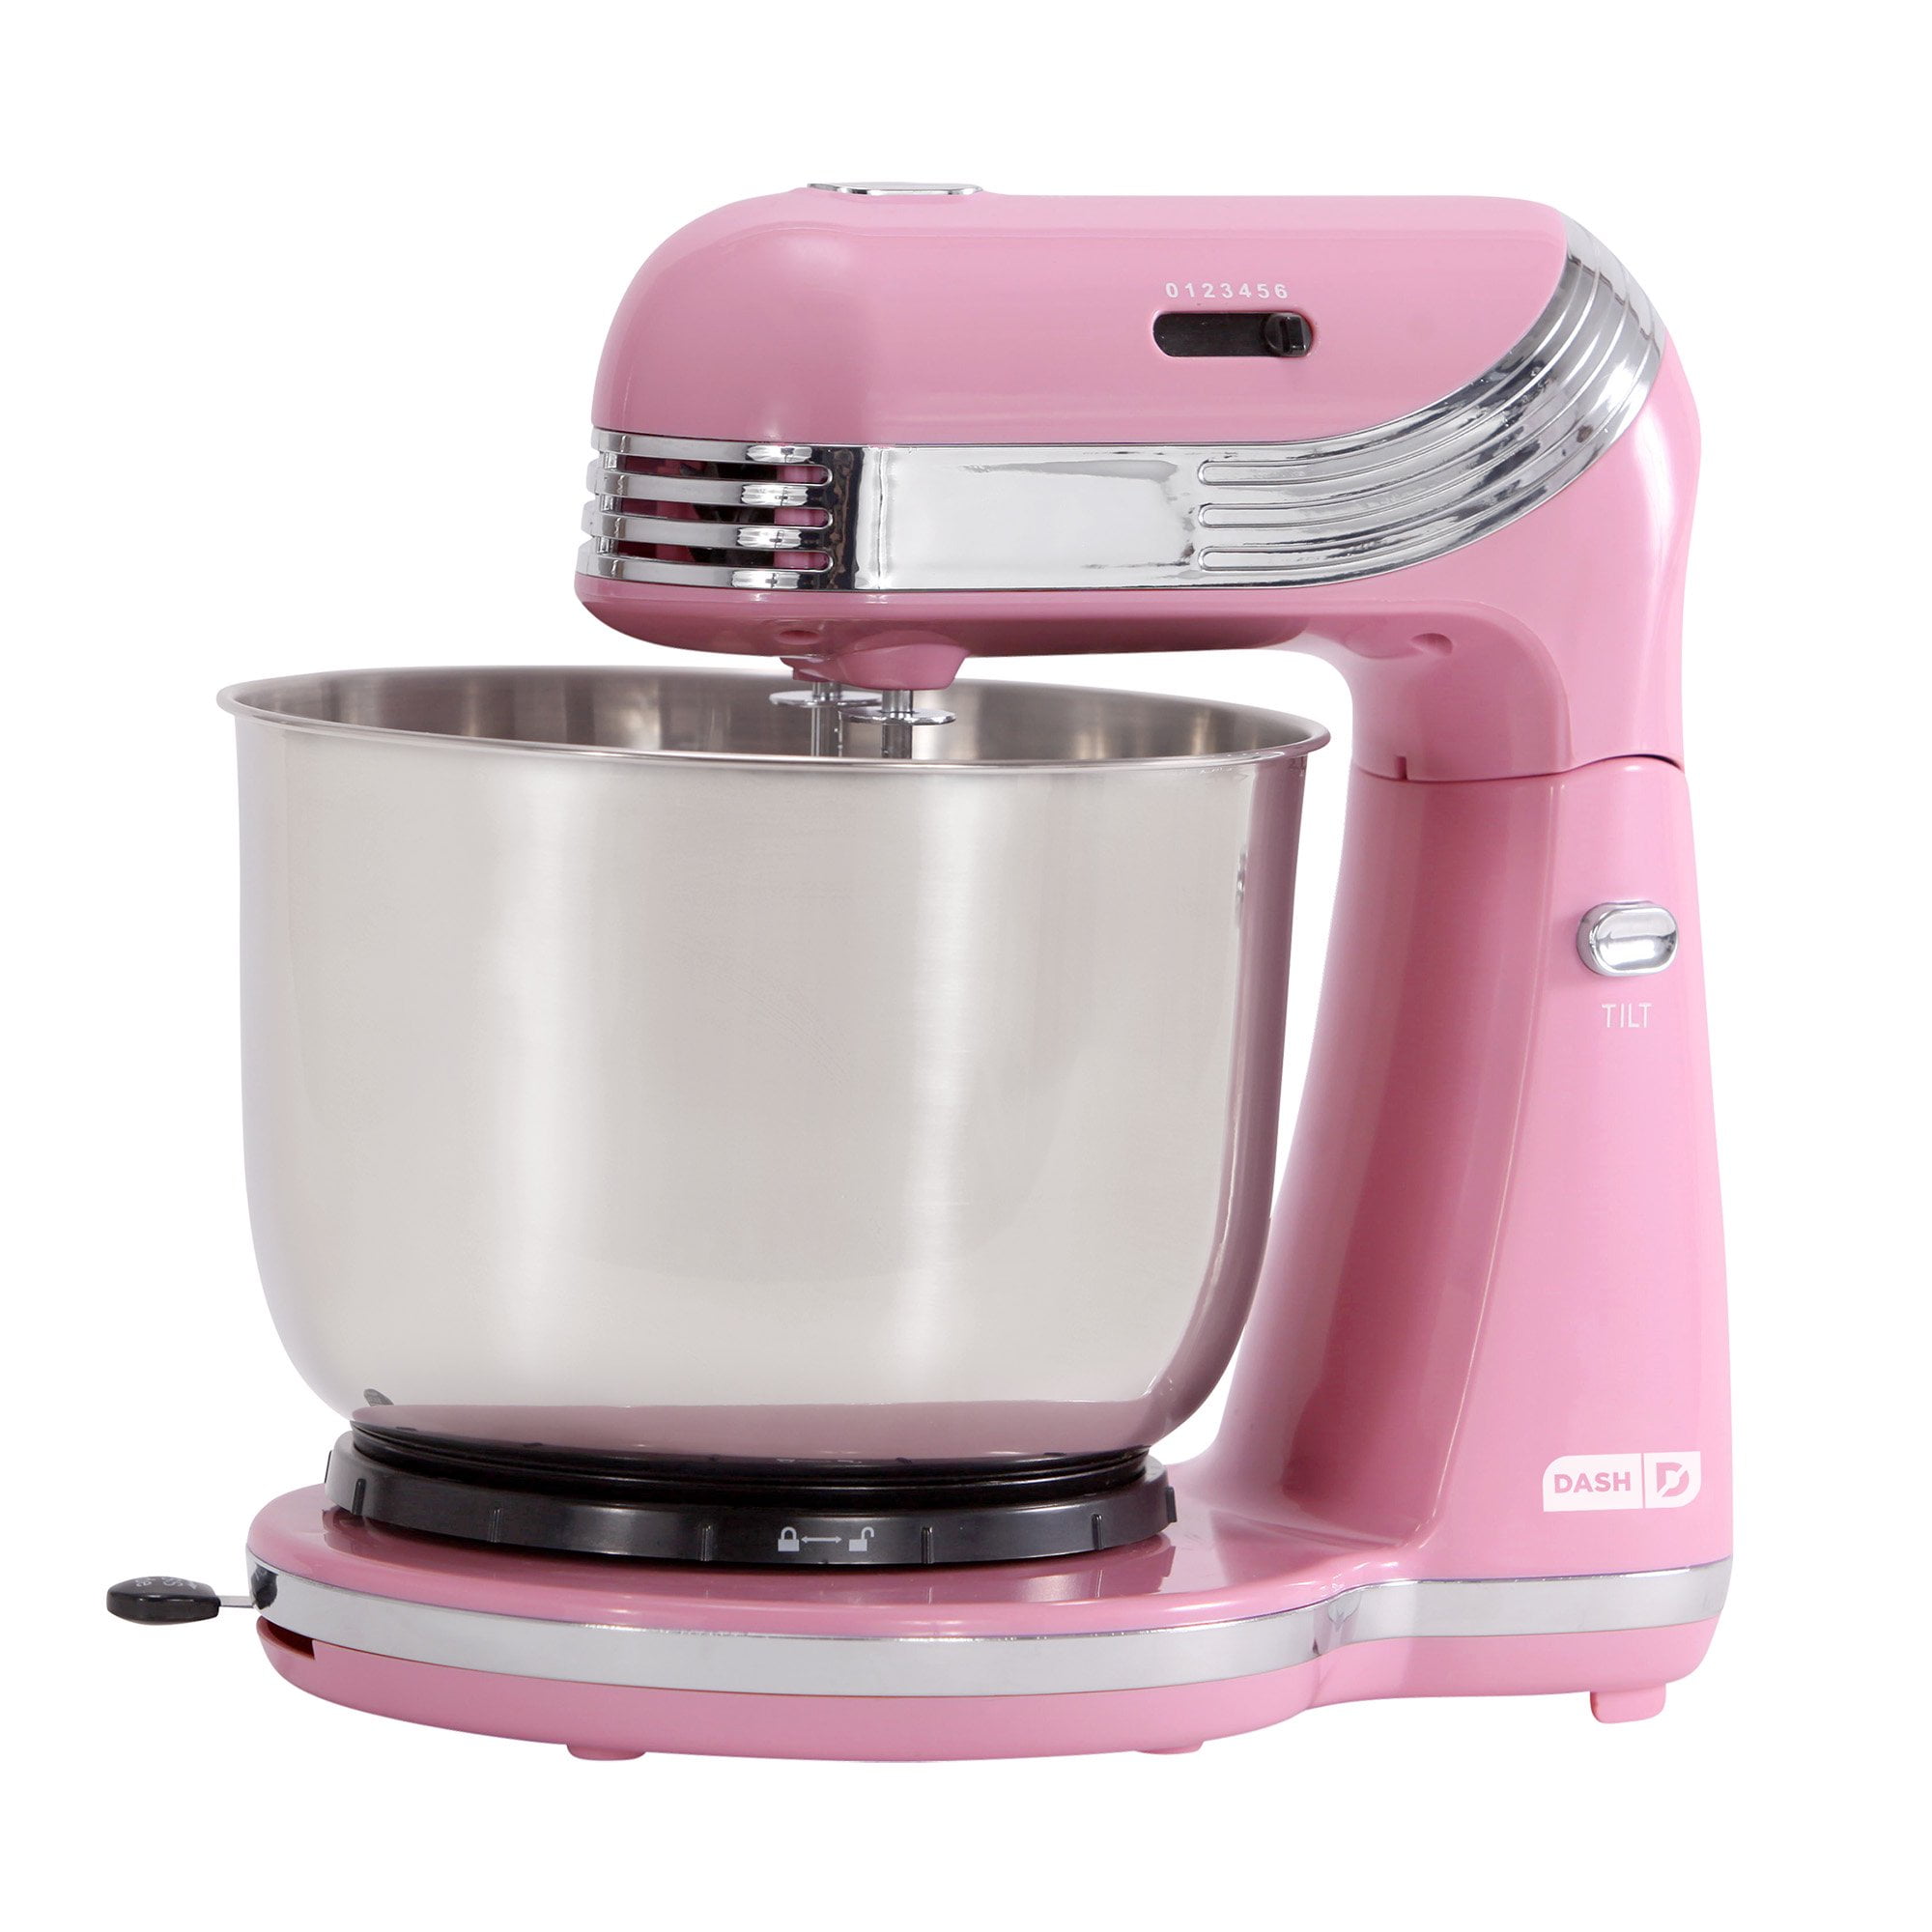 Dash Stand Mixer (Electric Mixer for Everyday Use): 6 SpeedWhite p#1042 for  Sale in Murfreesboro, TN - OfferUp